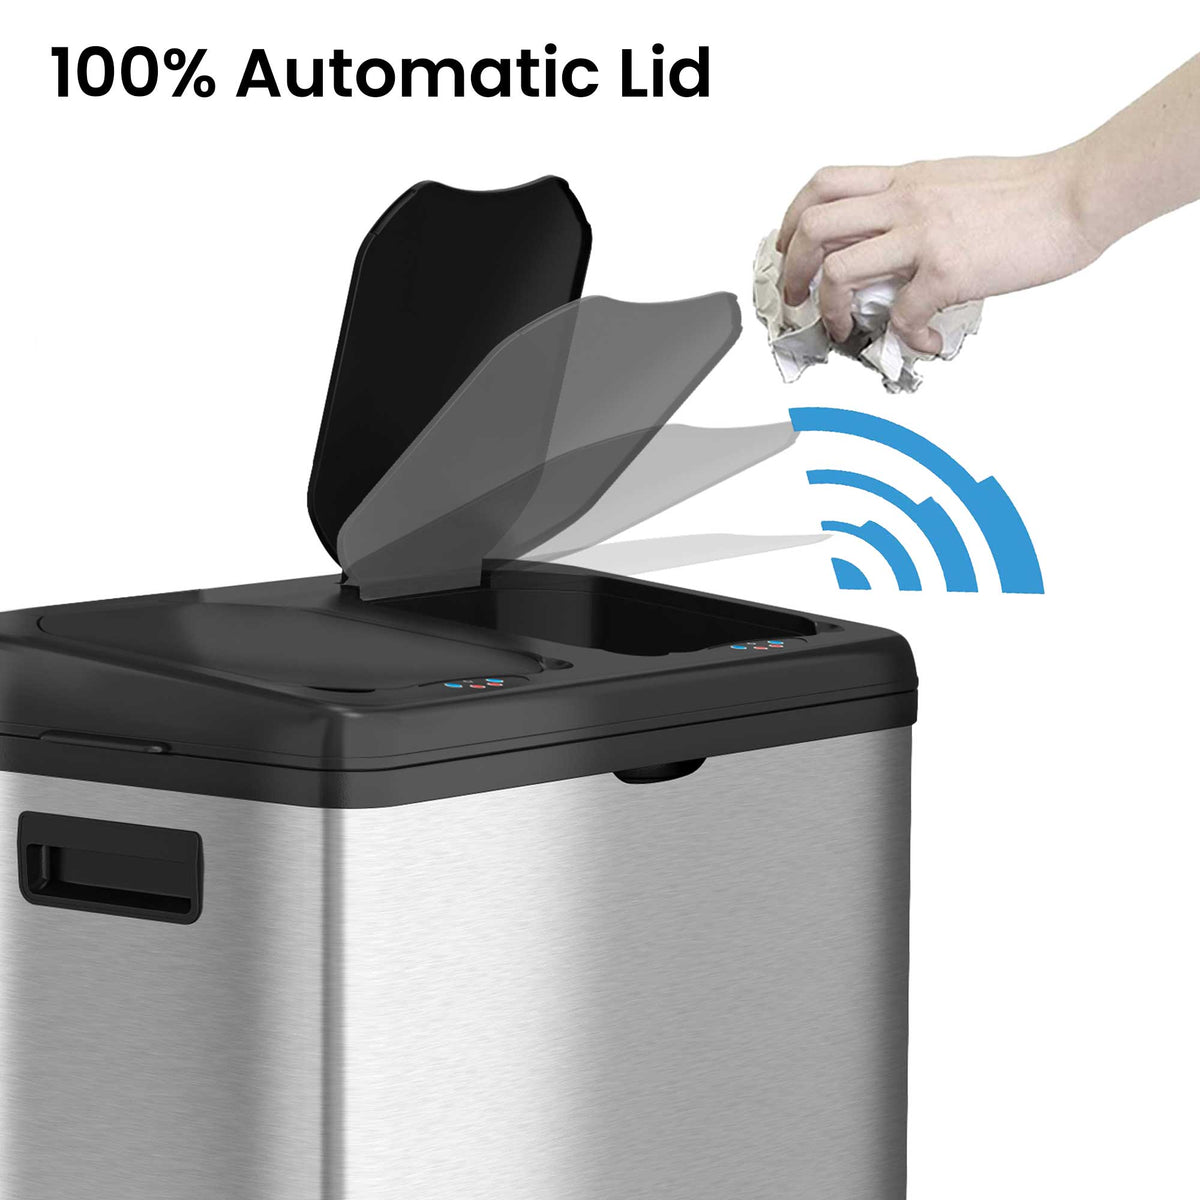 16 Gallon Dual-Compartment Stainless Steel Sensor Recycle Bin/Trash Can with Black Lid 100% Automatic Lid